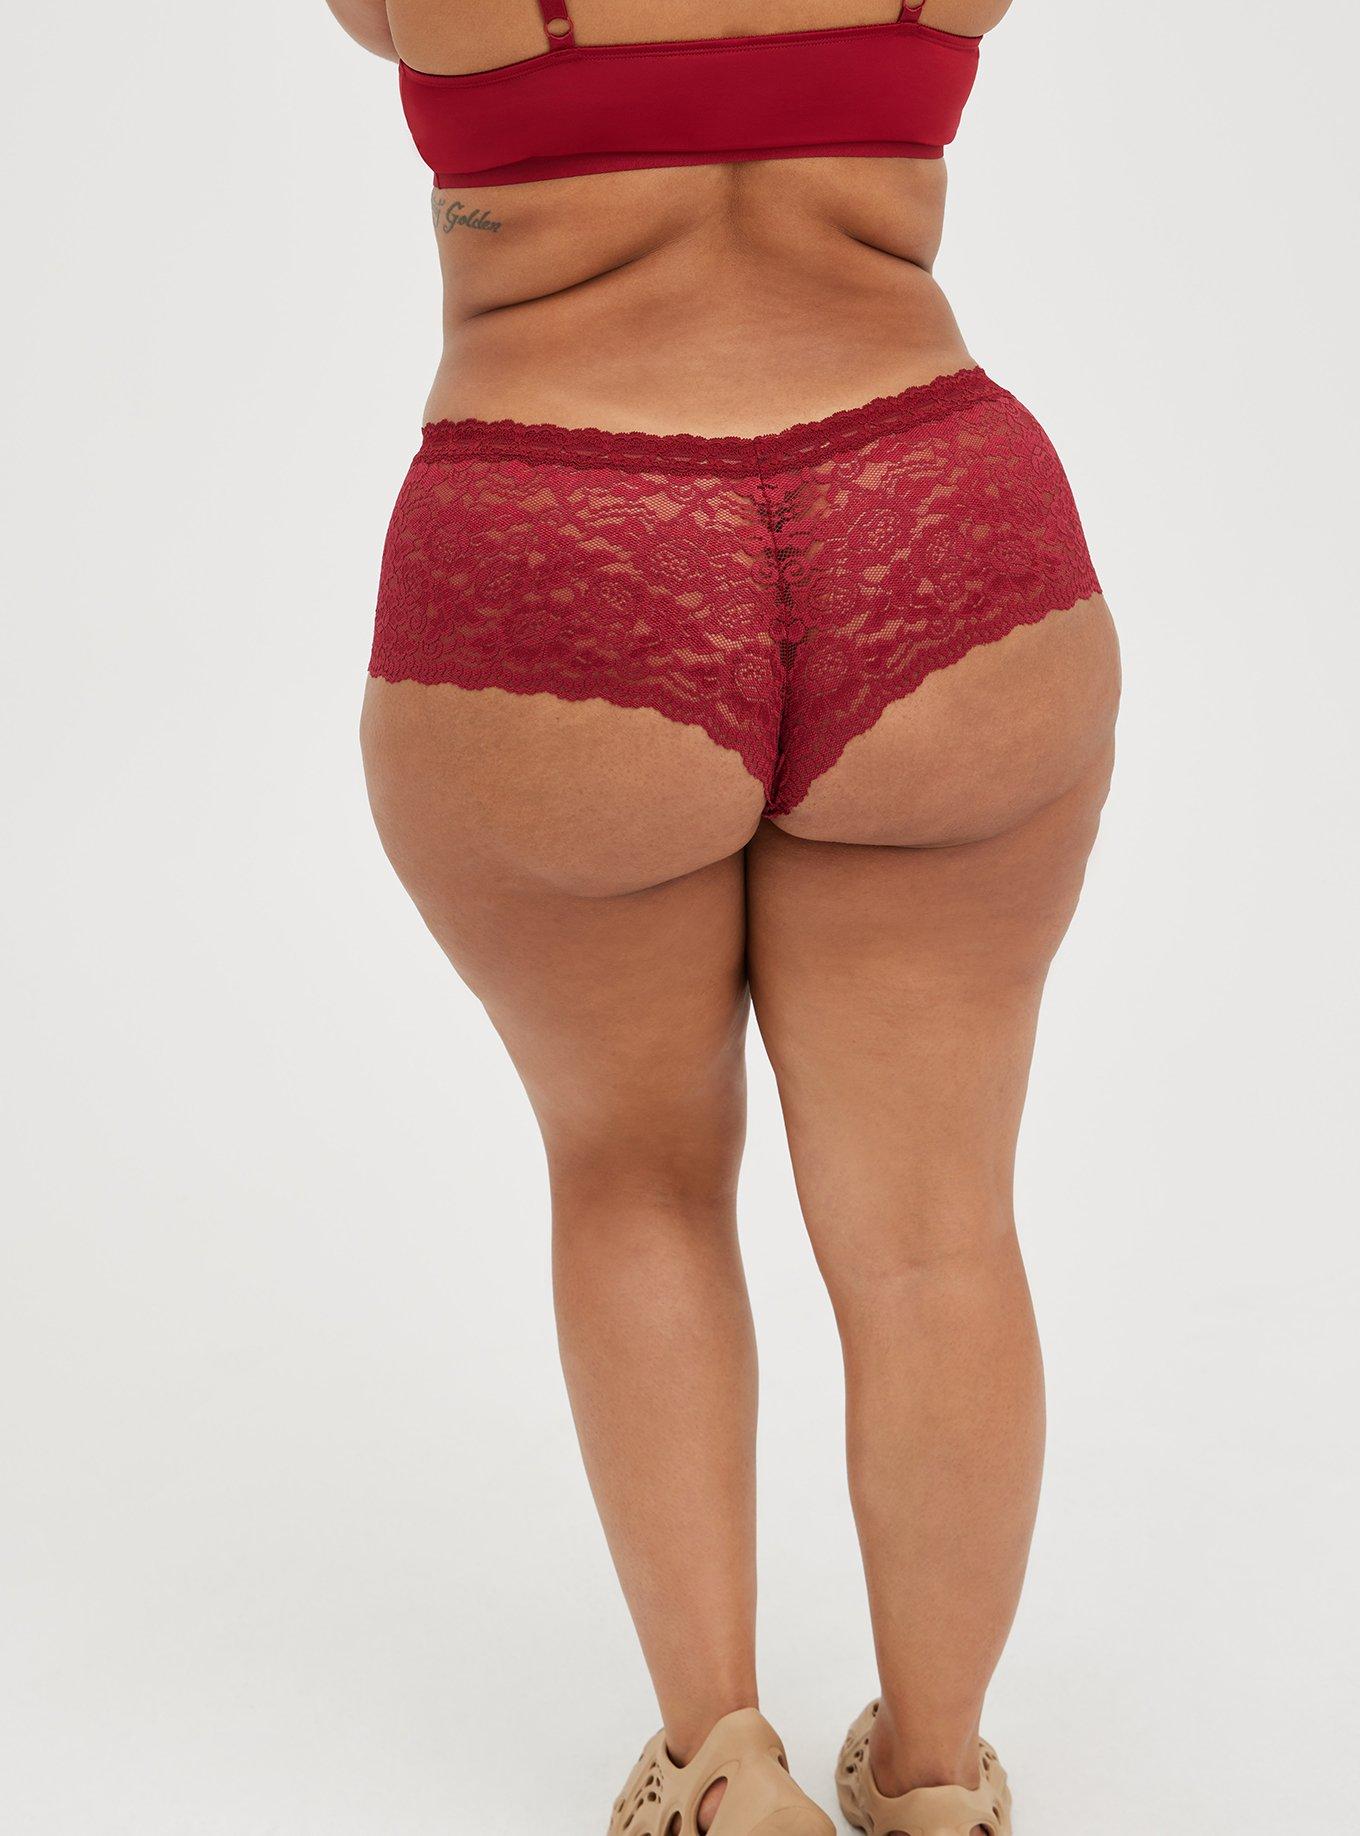 Red Lace Crotchless Panties for a Woman, Sexy Panties for Amazing Underwear  Experience, Great Gift for Girlfriend, Red Lace Lingerie Item -  Canada